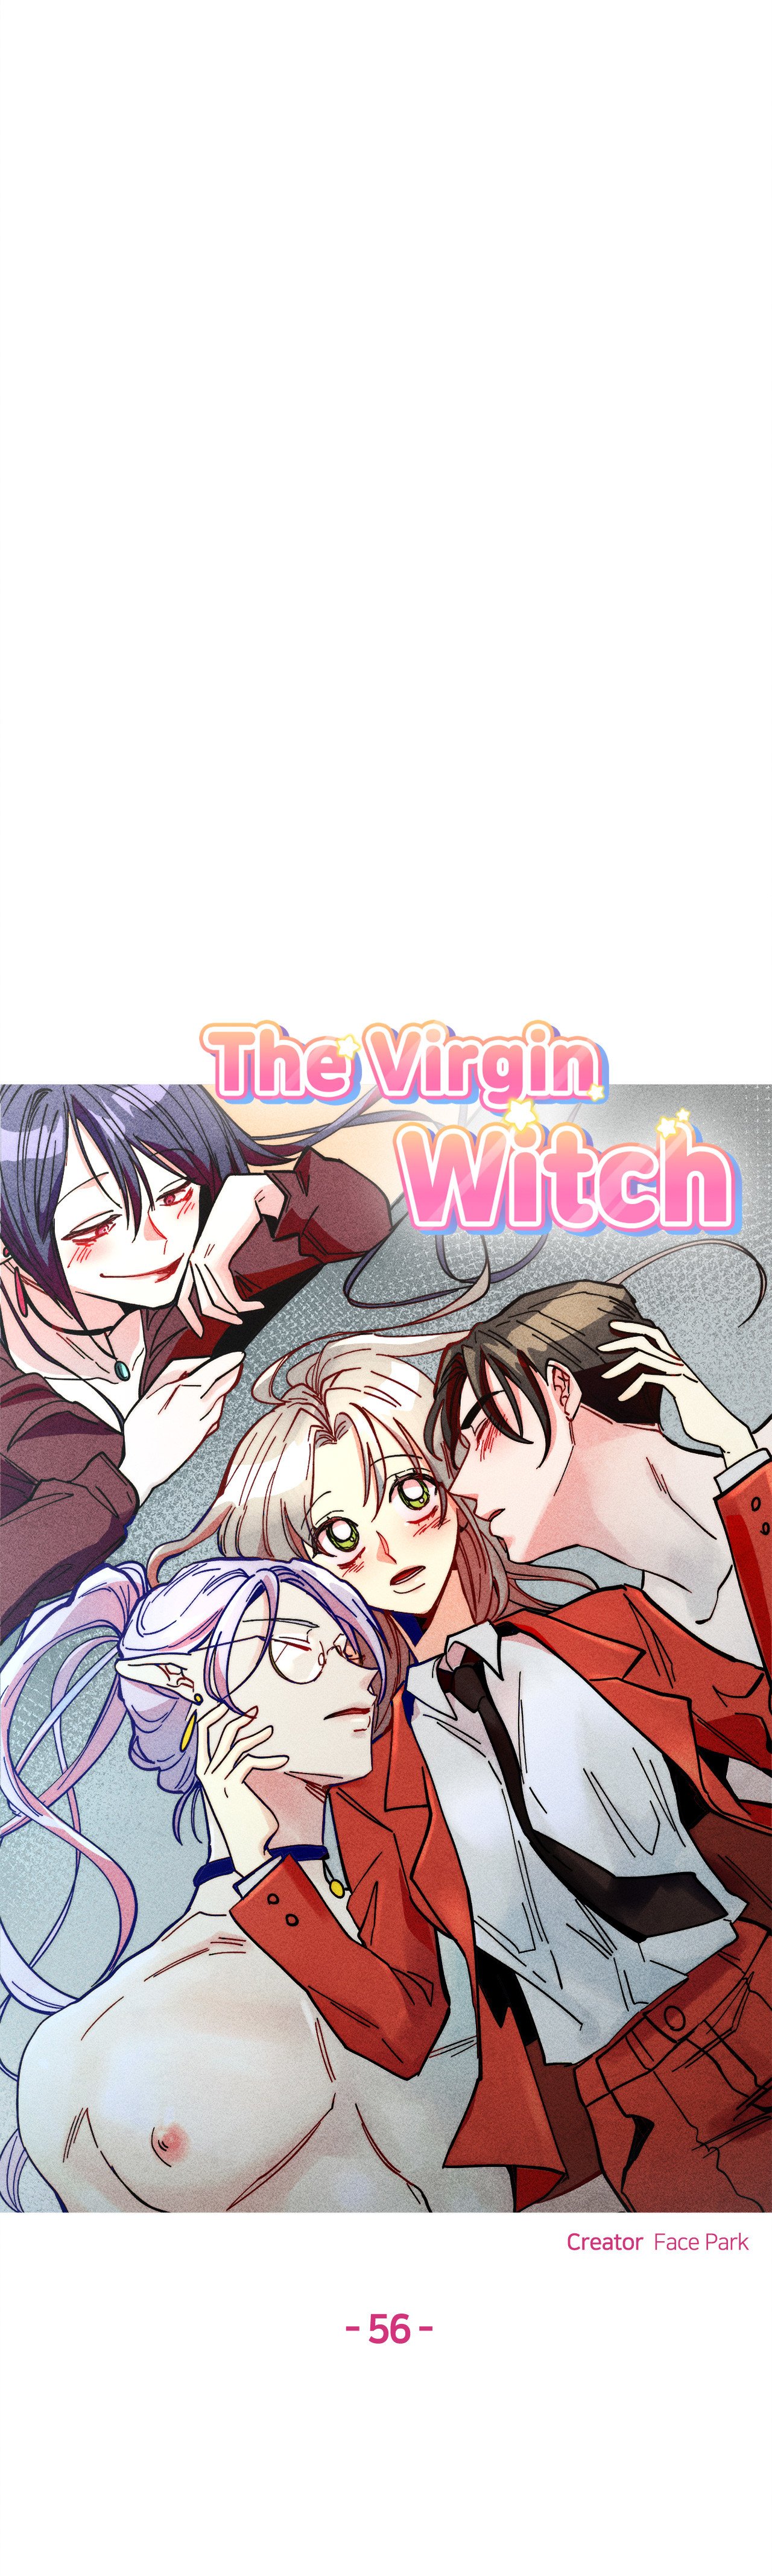 the-virgin-witch-chap-56-3